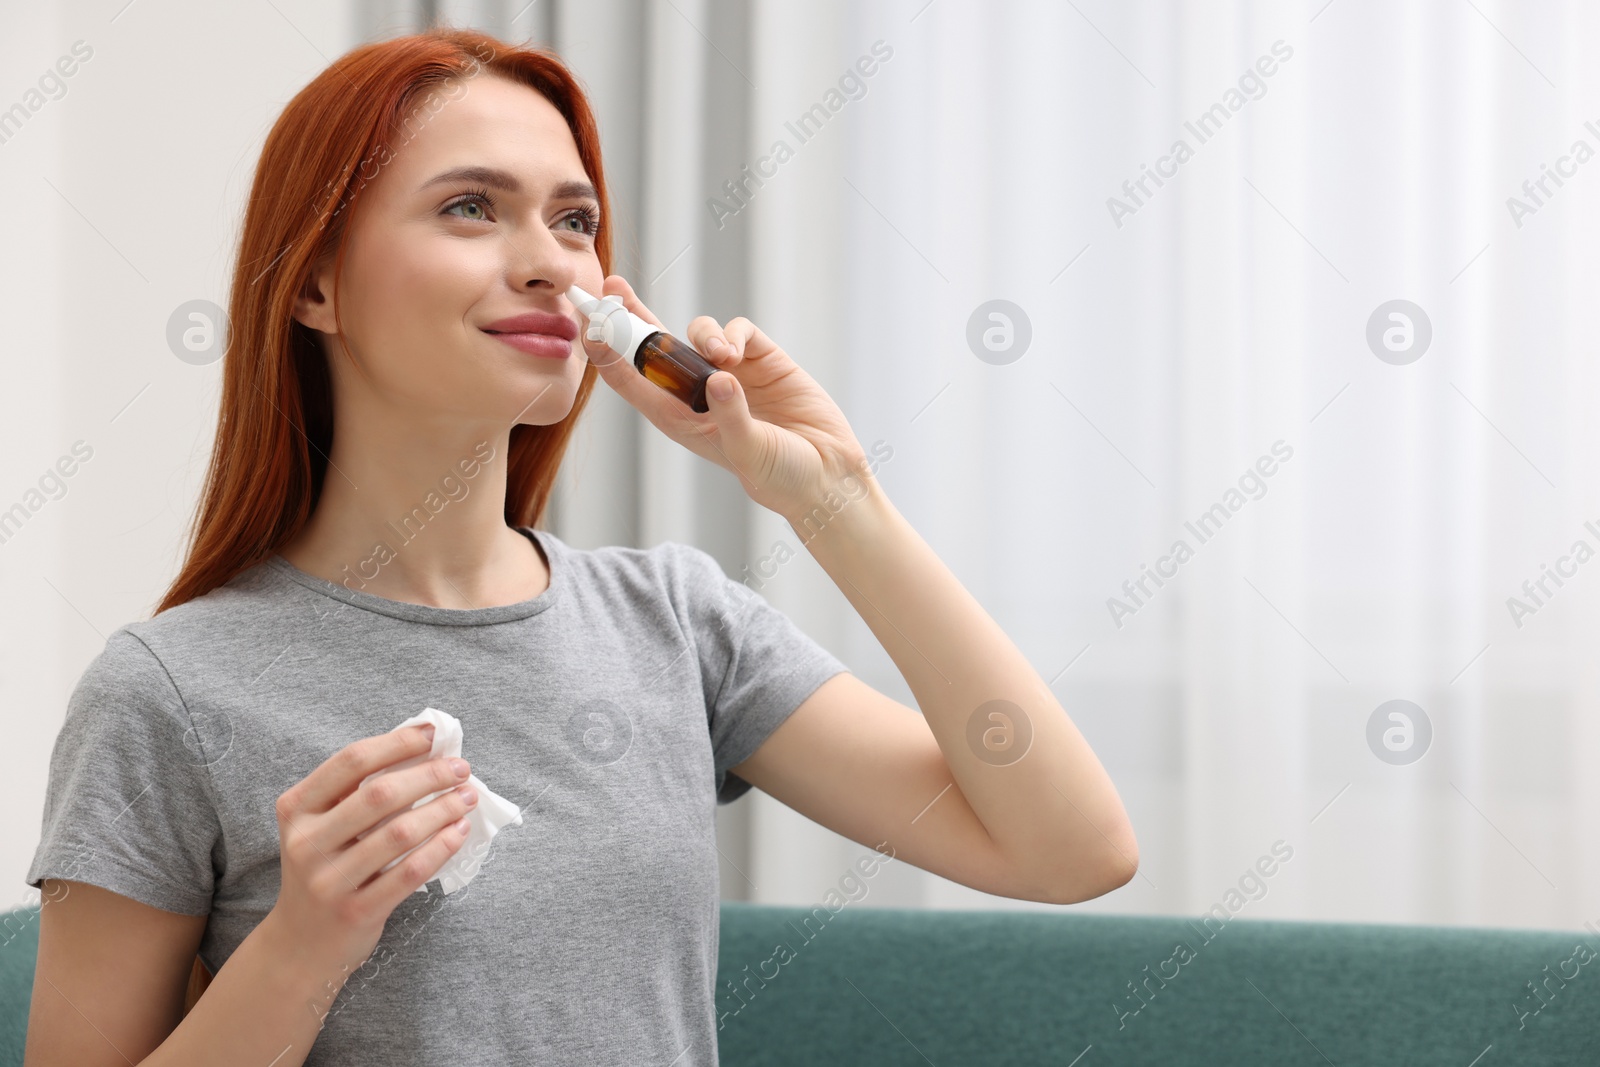 Photo of Medical drops. Woman with tissue using nasal spray at home, space for text